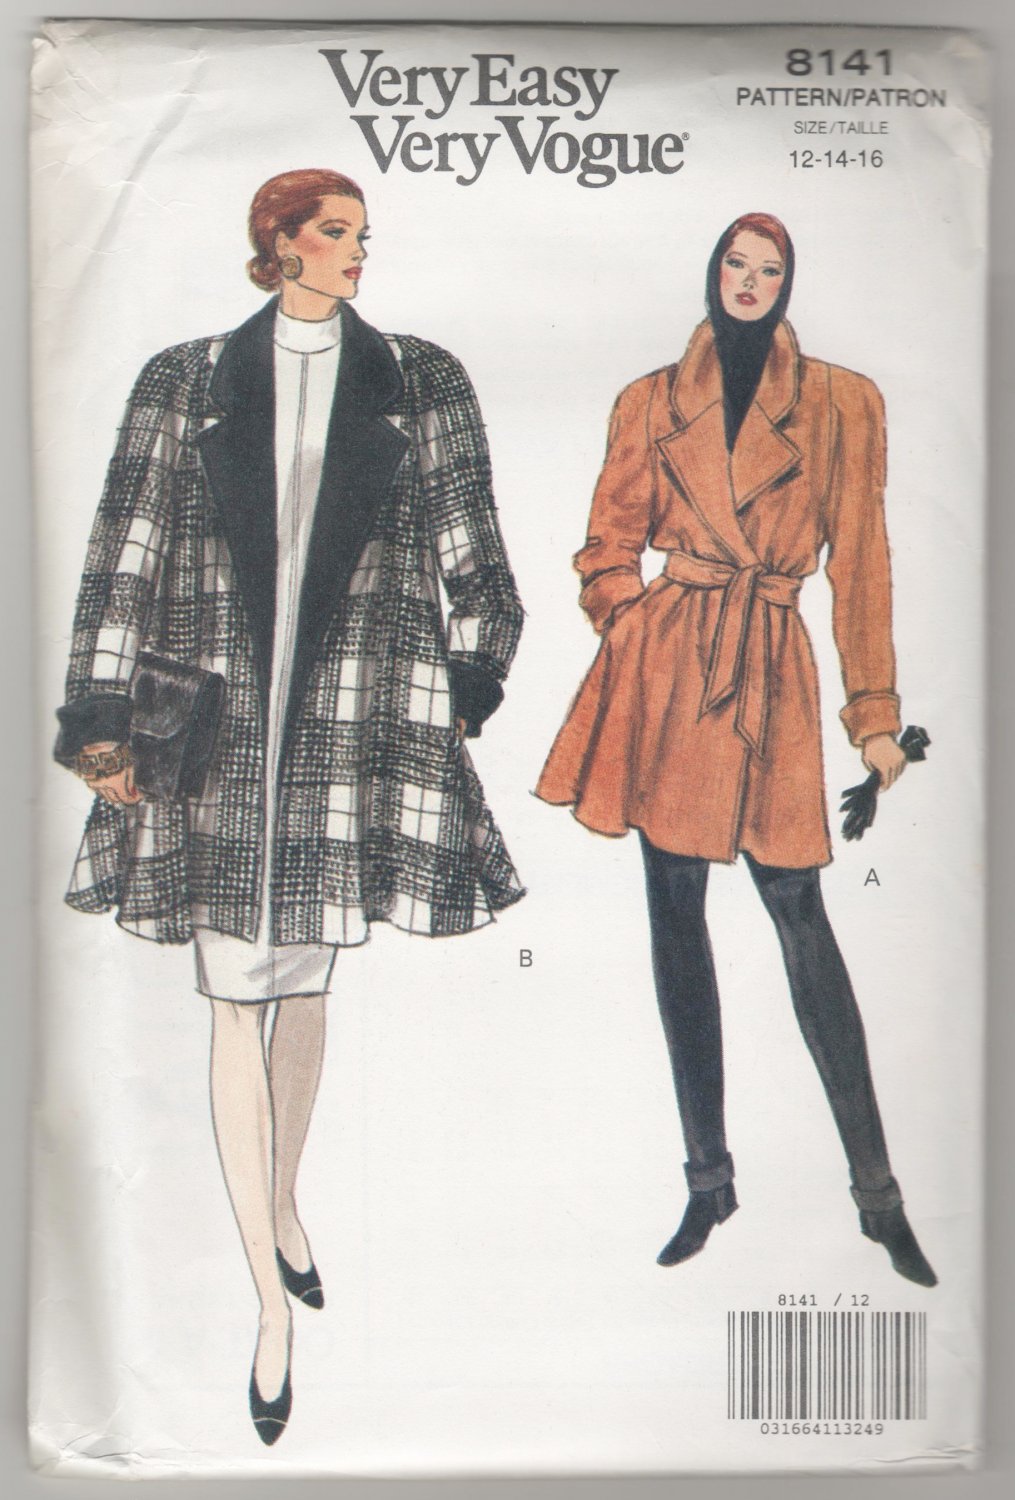 Very Easy Very Vogue 8141 Sewing Pattern Misses Coat Loose Fitting Size 12 14 16 Uncut Bust 34 36 38